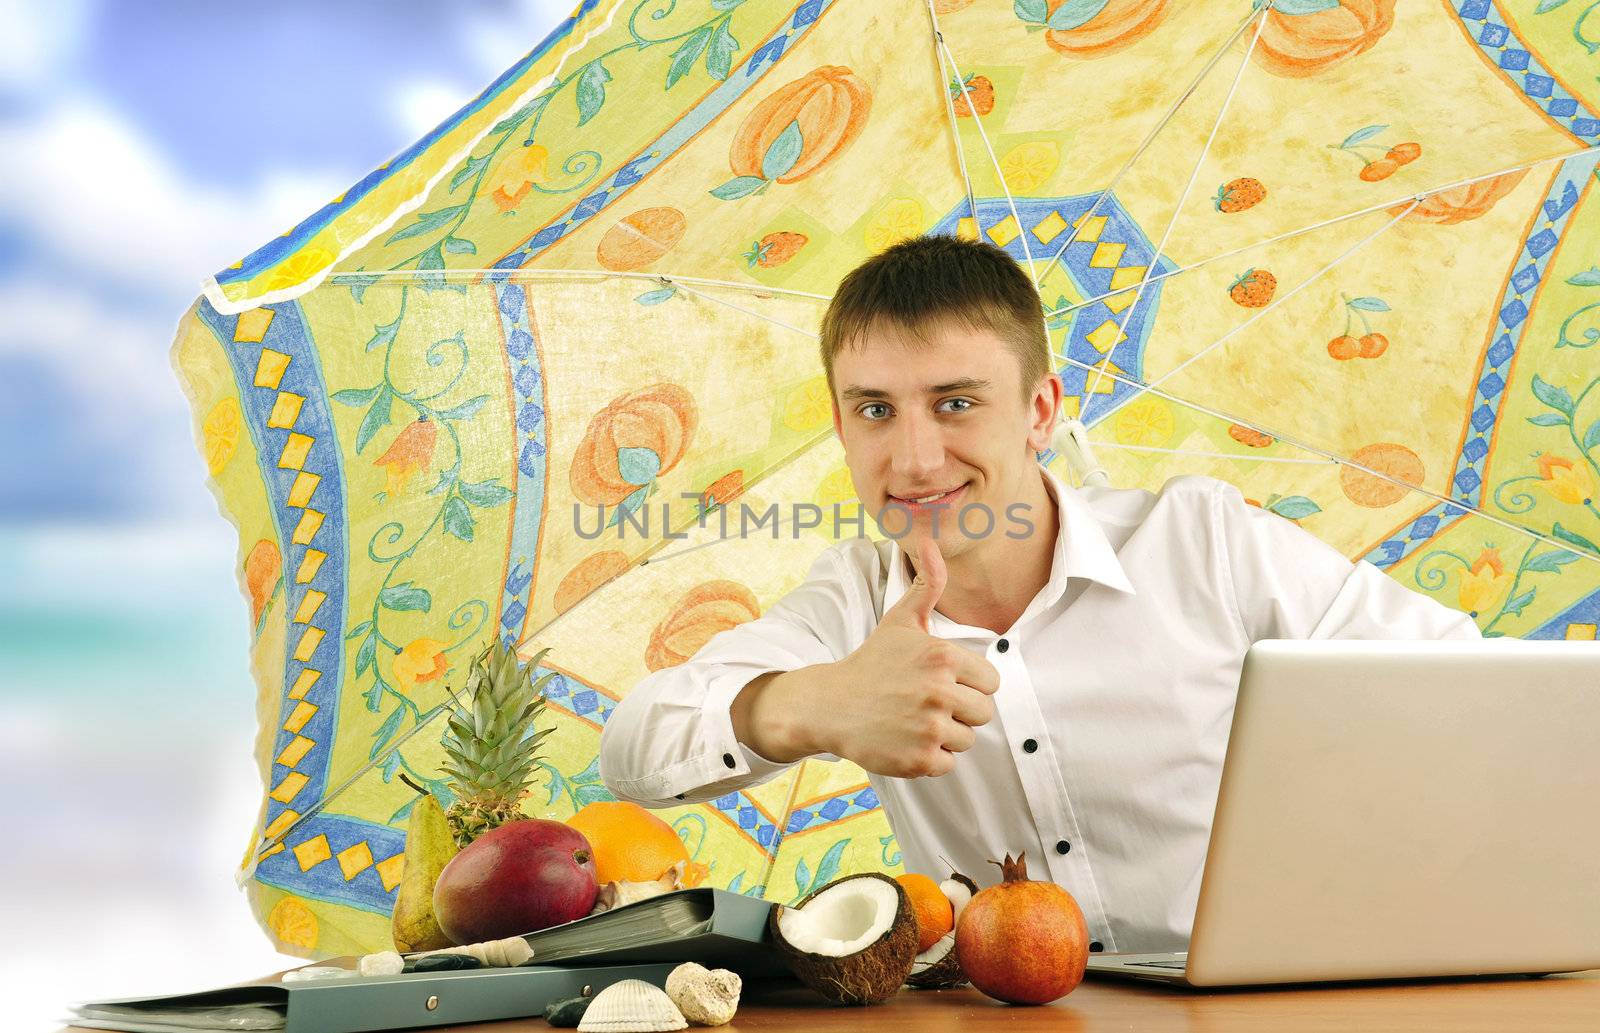 young business man on vacation showing thumbs up